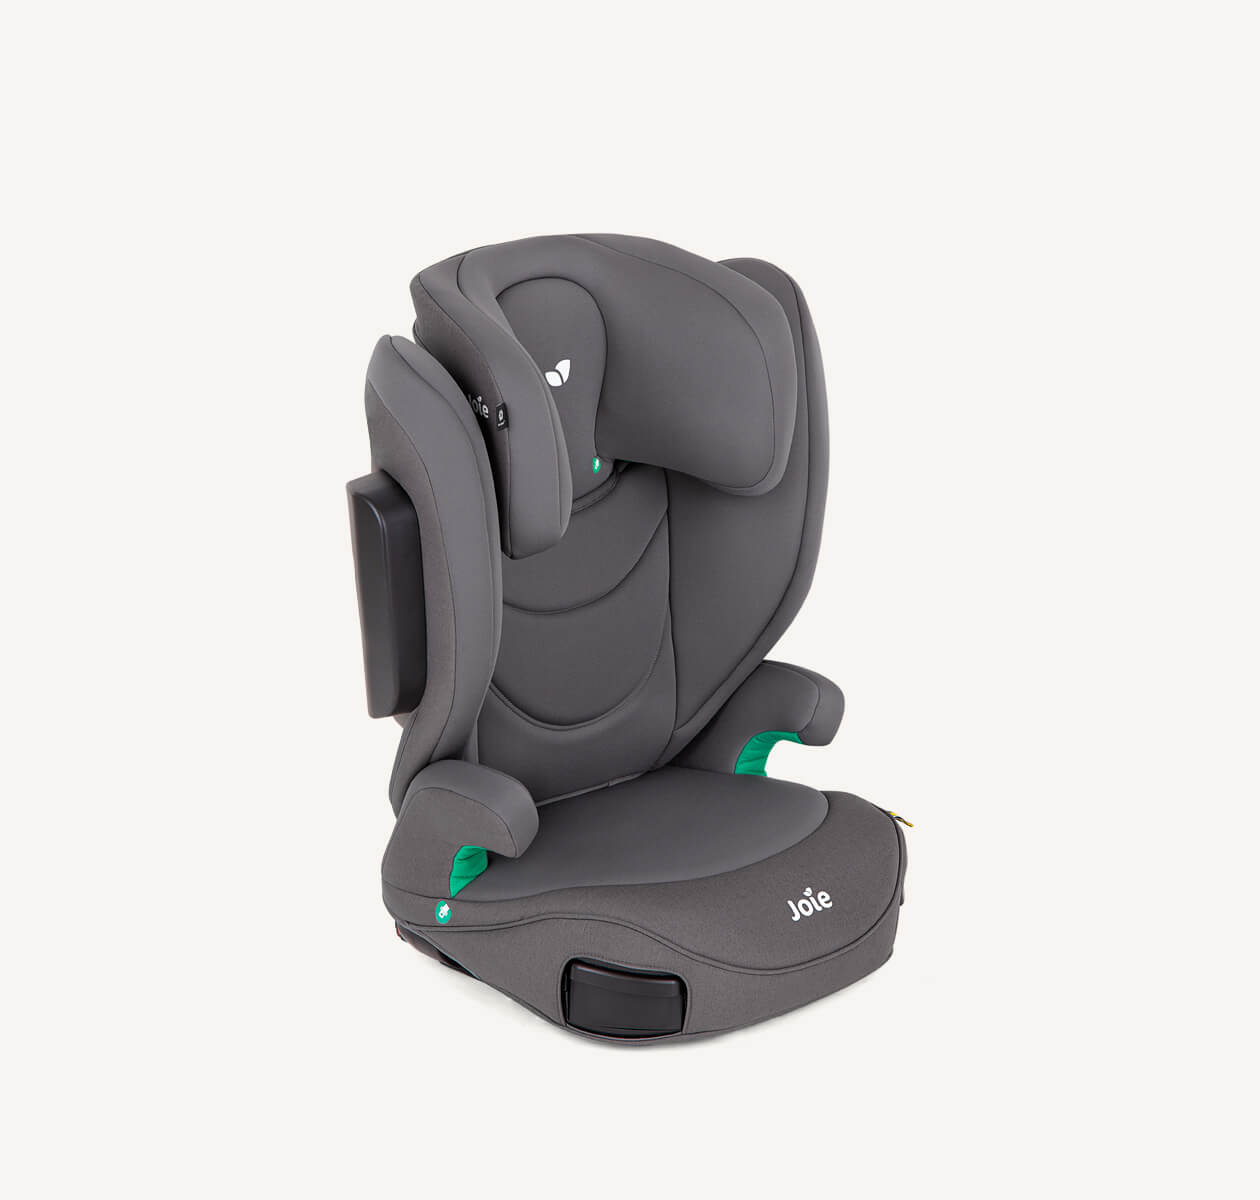 Gray i-Trillo FX  high back booster seat facing to the right at a 45 degree angle with the headrest in the lowest position.